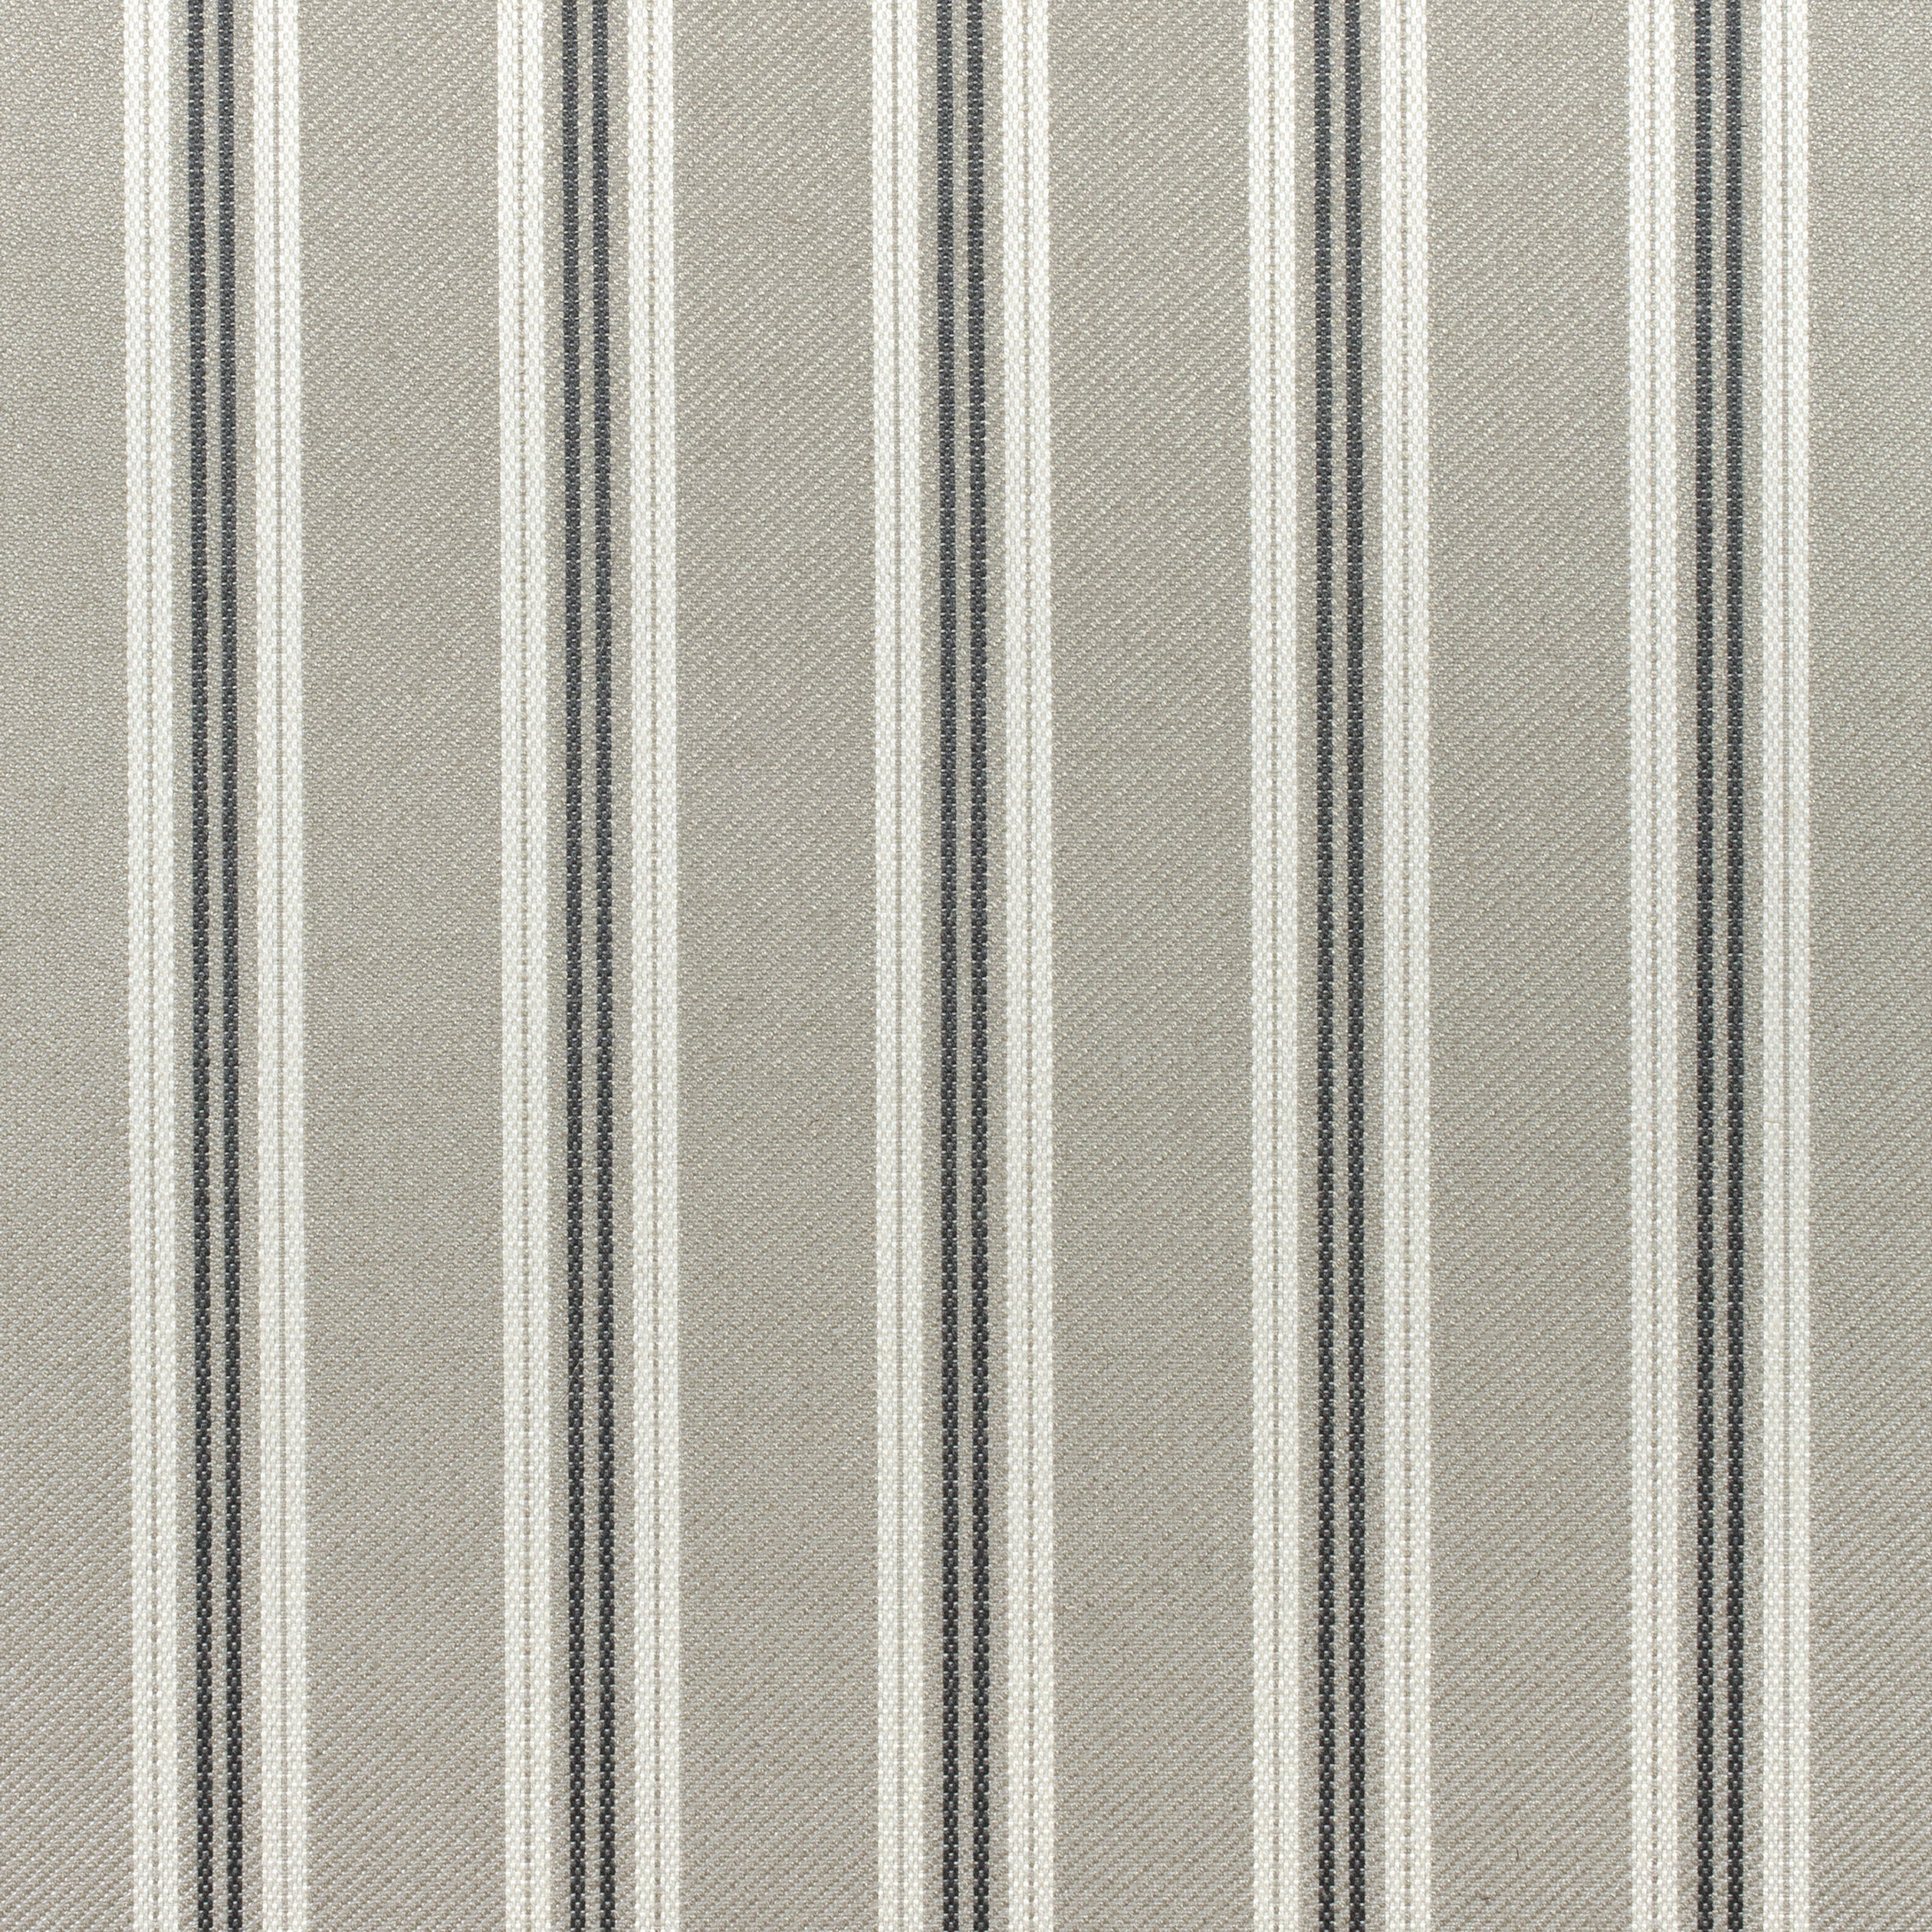 Colonnade Stripe fabric in charcoal color - pattern number W80738 - by Thibaut in the Woven Resource 11: Rialto collection